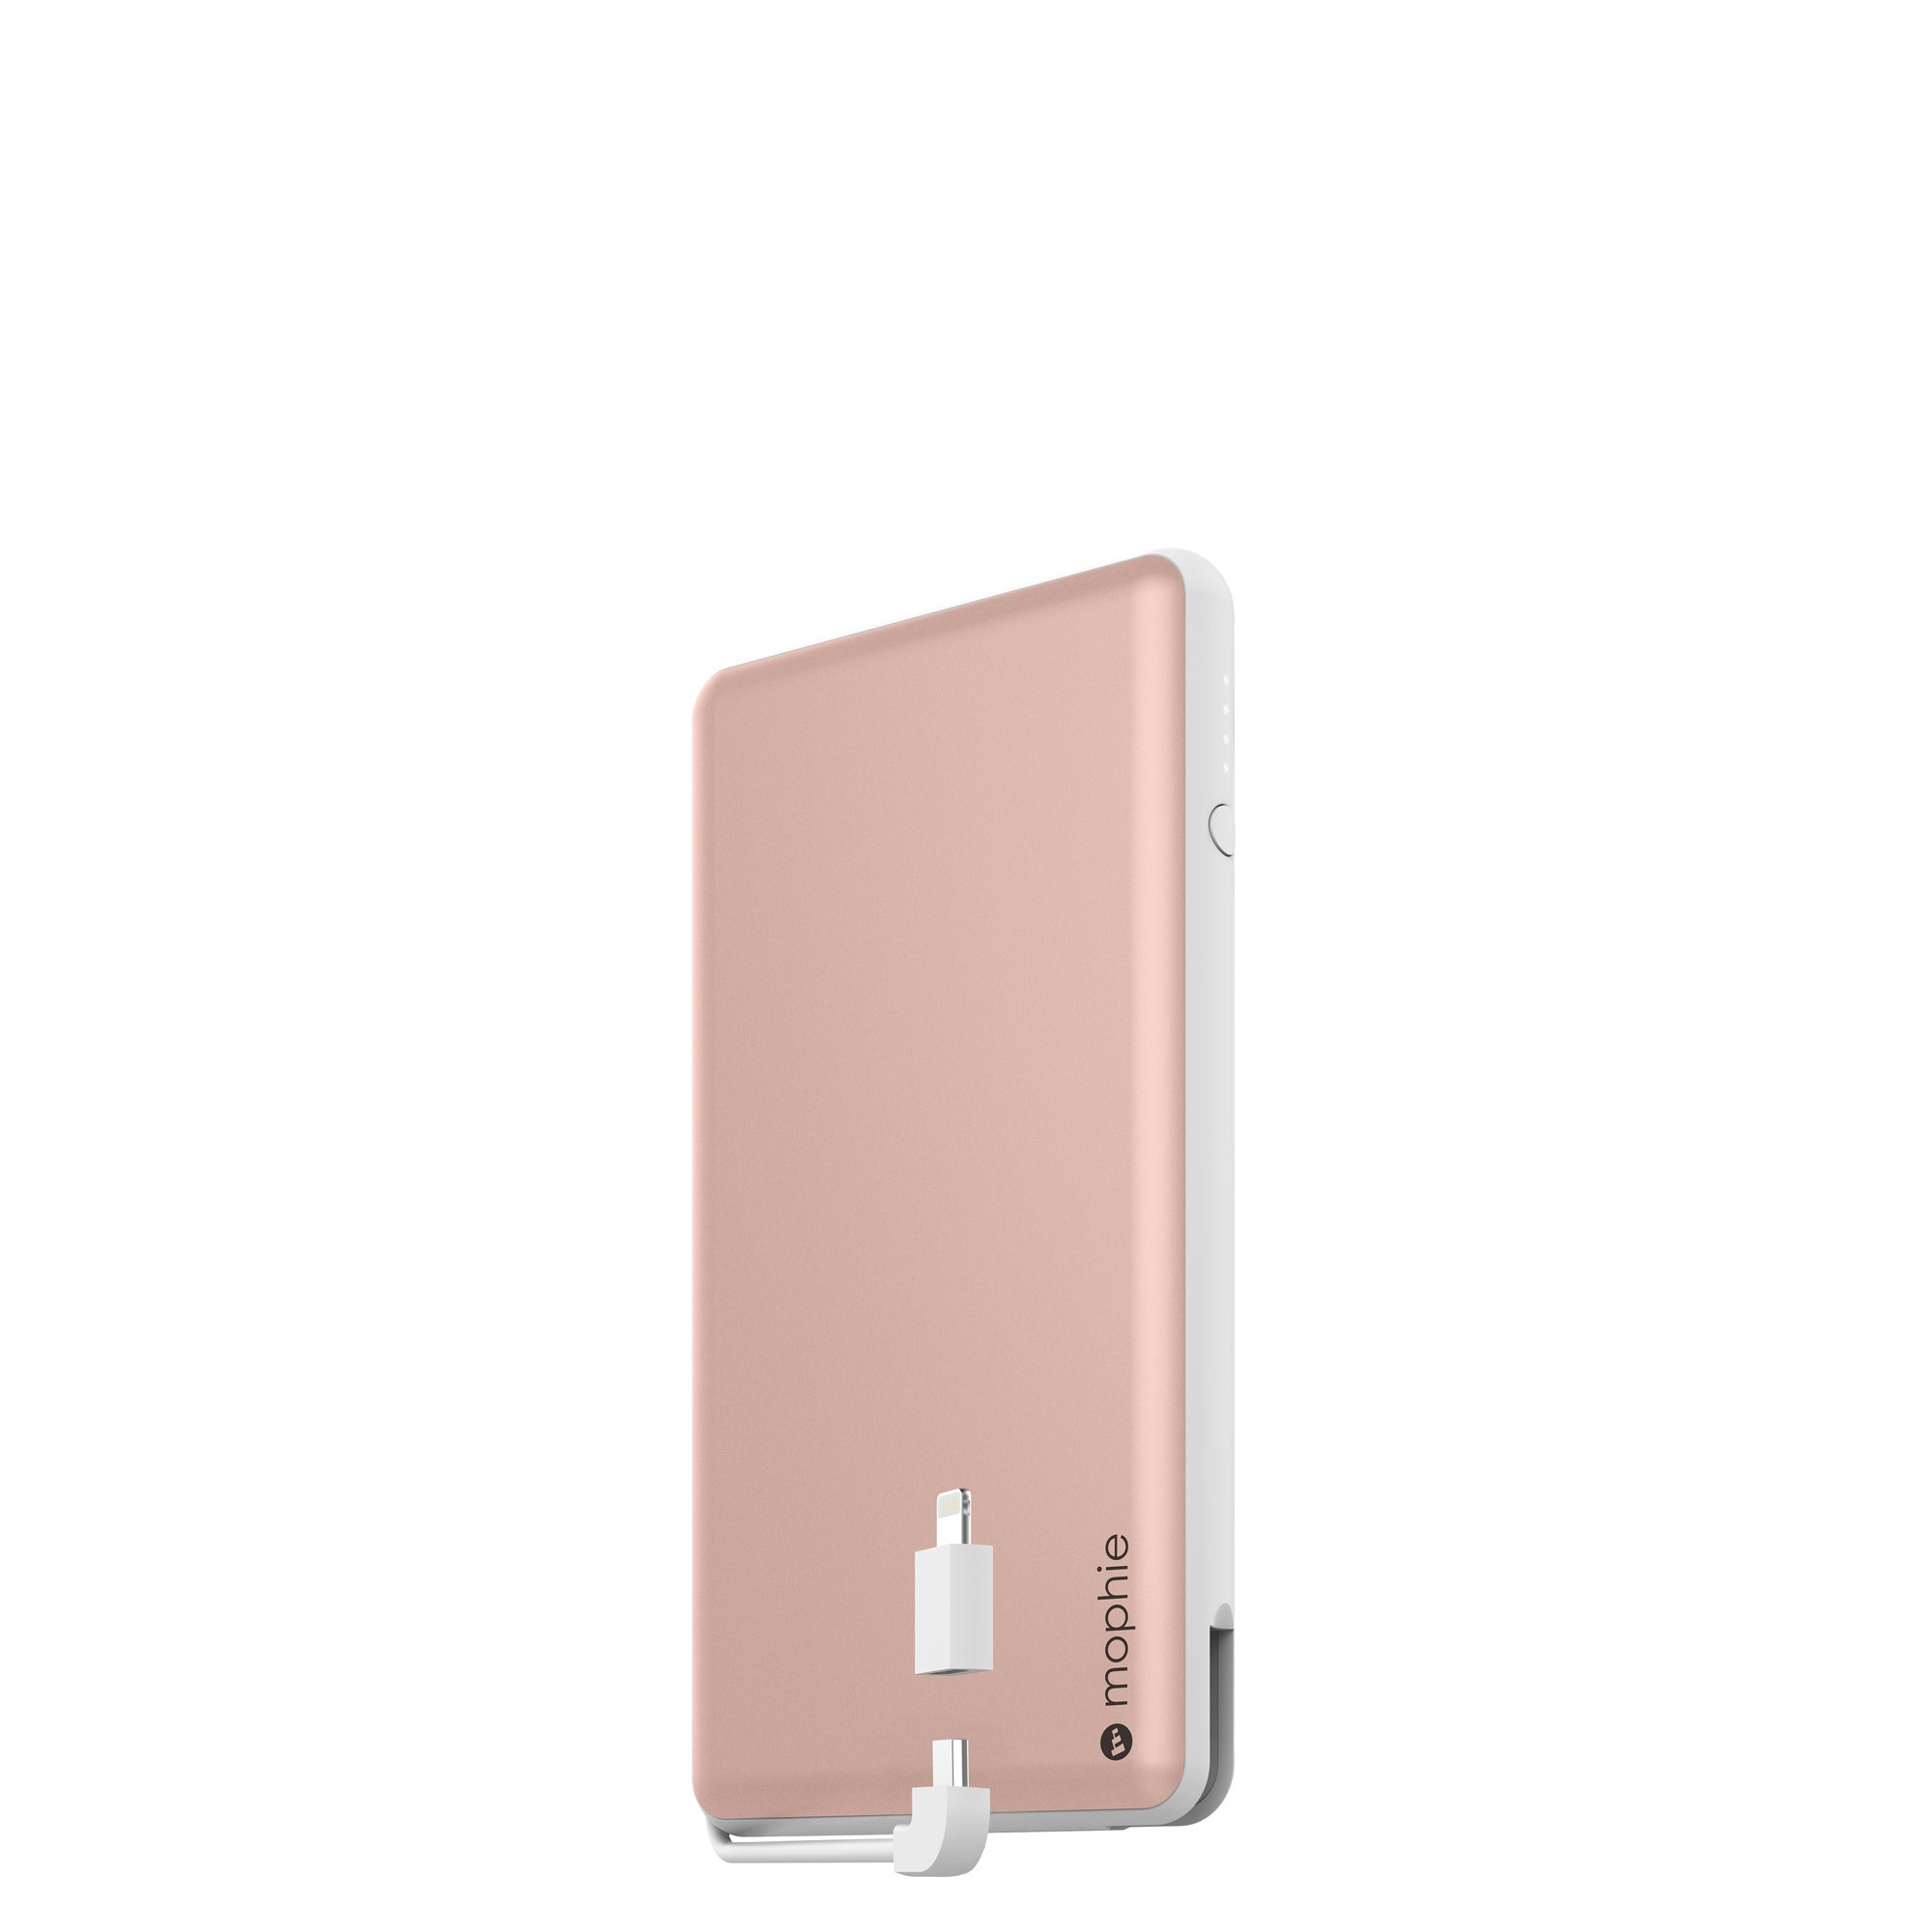 Mophie Powerstation Plus Rose Gold 12000MaH With Lightiing Connector Power Bank